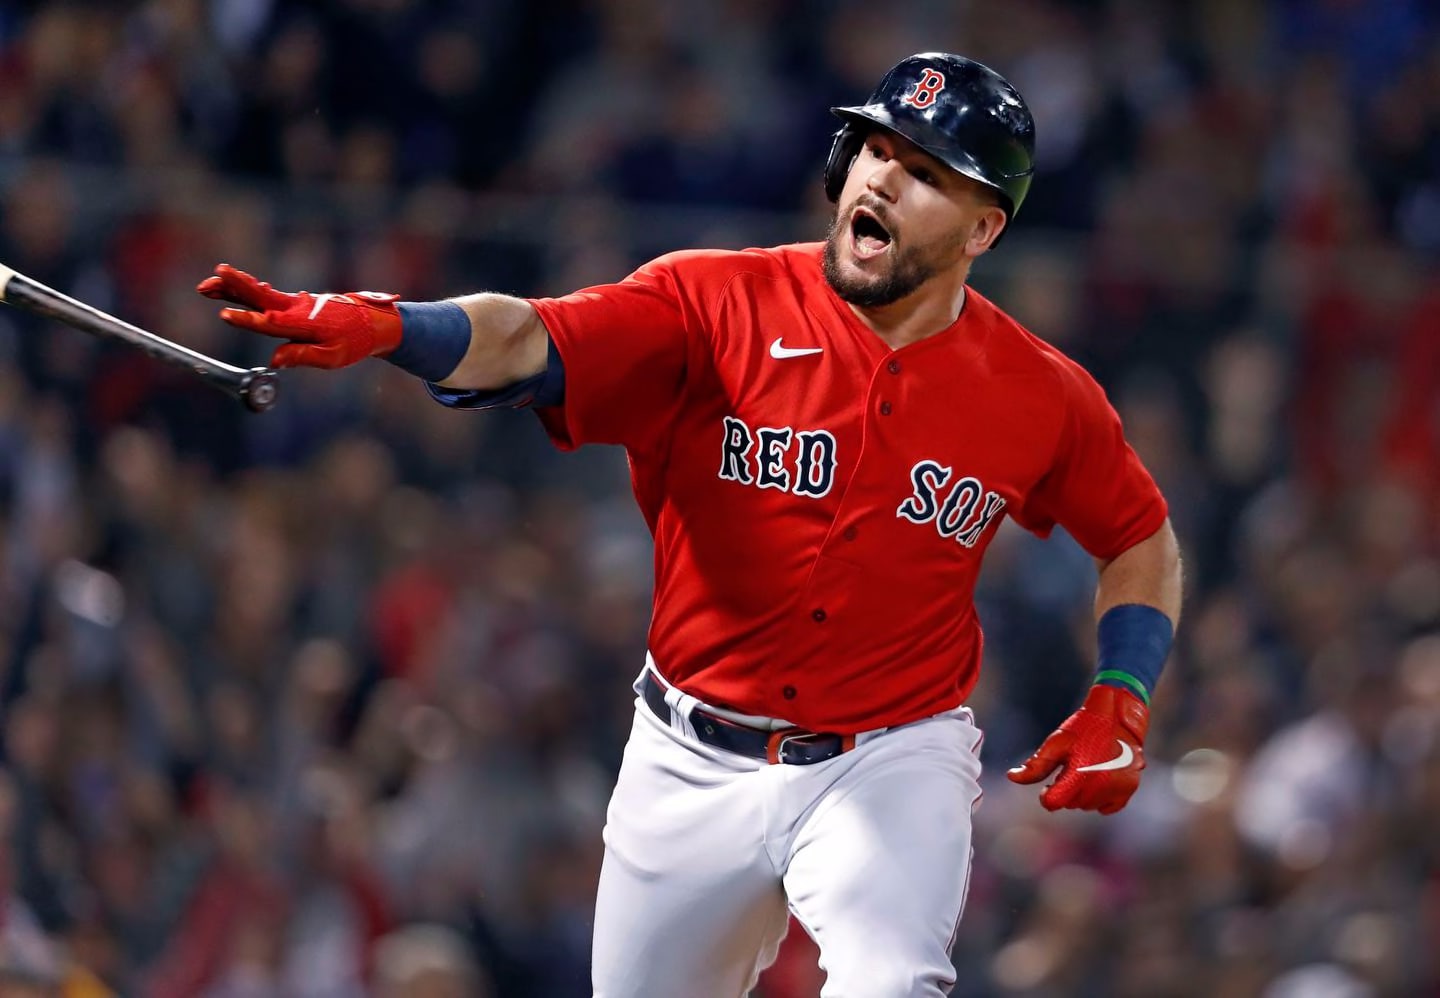 Kyle Schwarber gave the Red Sox a 3-0 lead with a solo home run in the third inning.